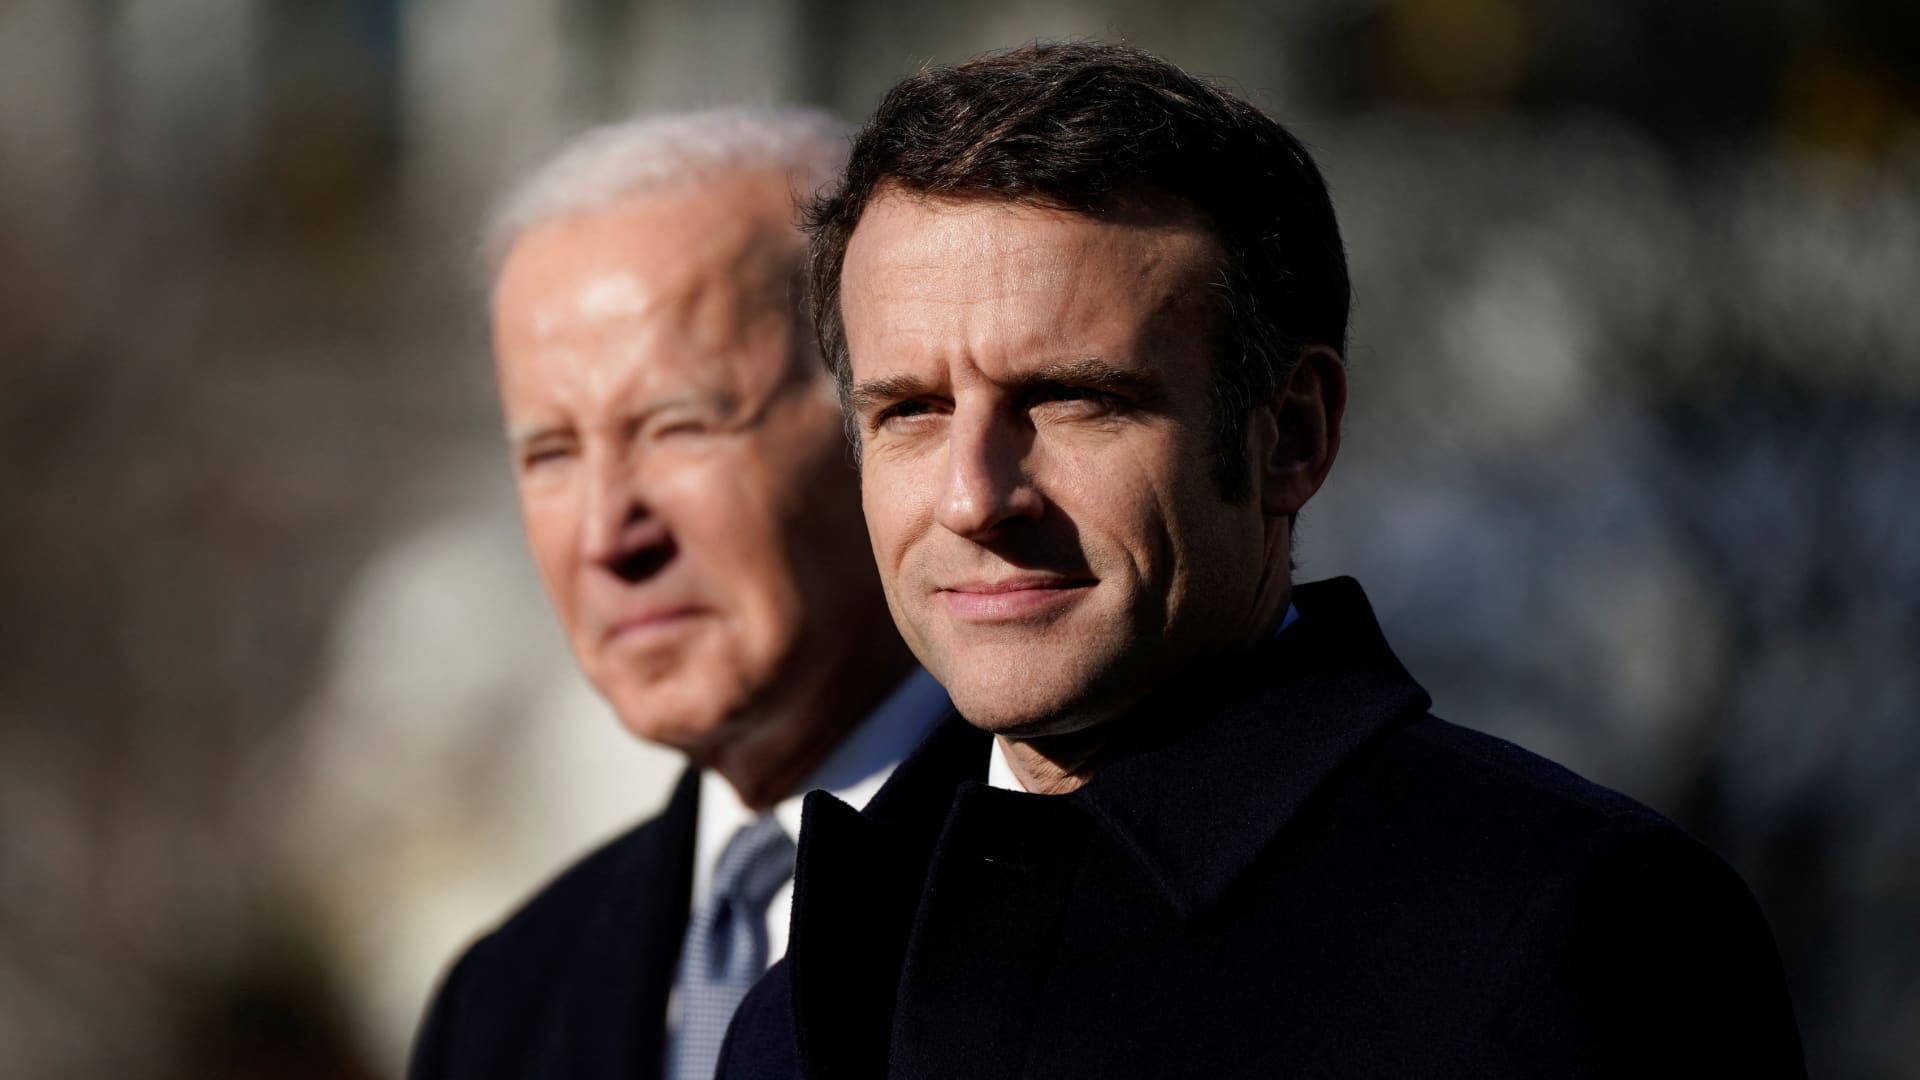 In Biden’s first state visit, French President Macron says U.S. must stand with democracies amid Russian aggression